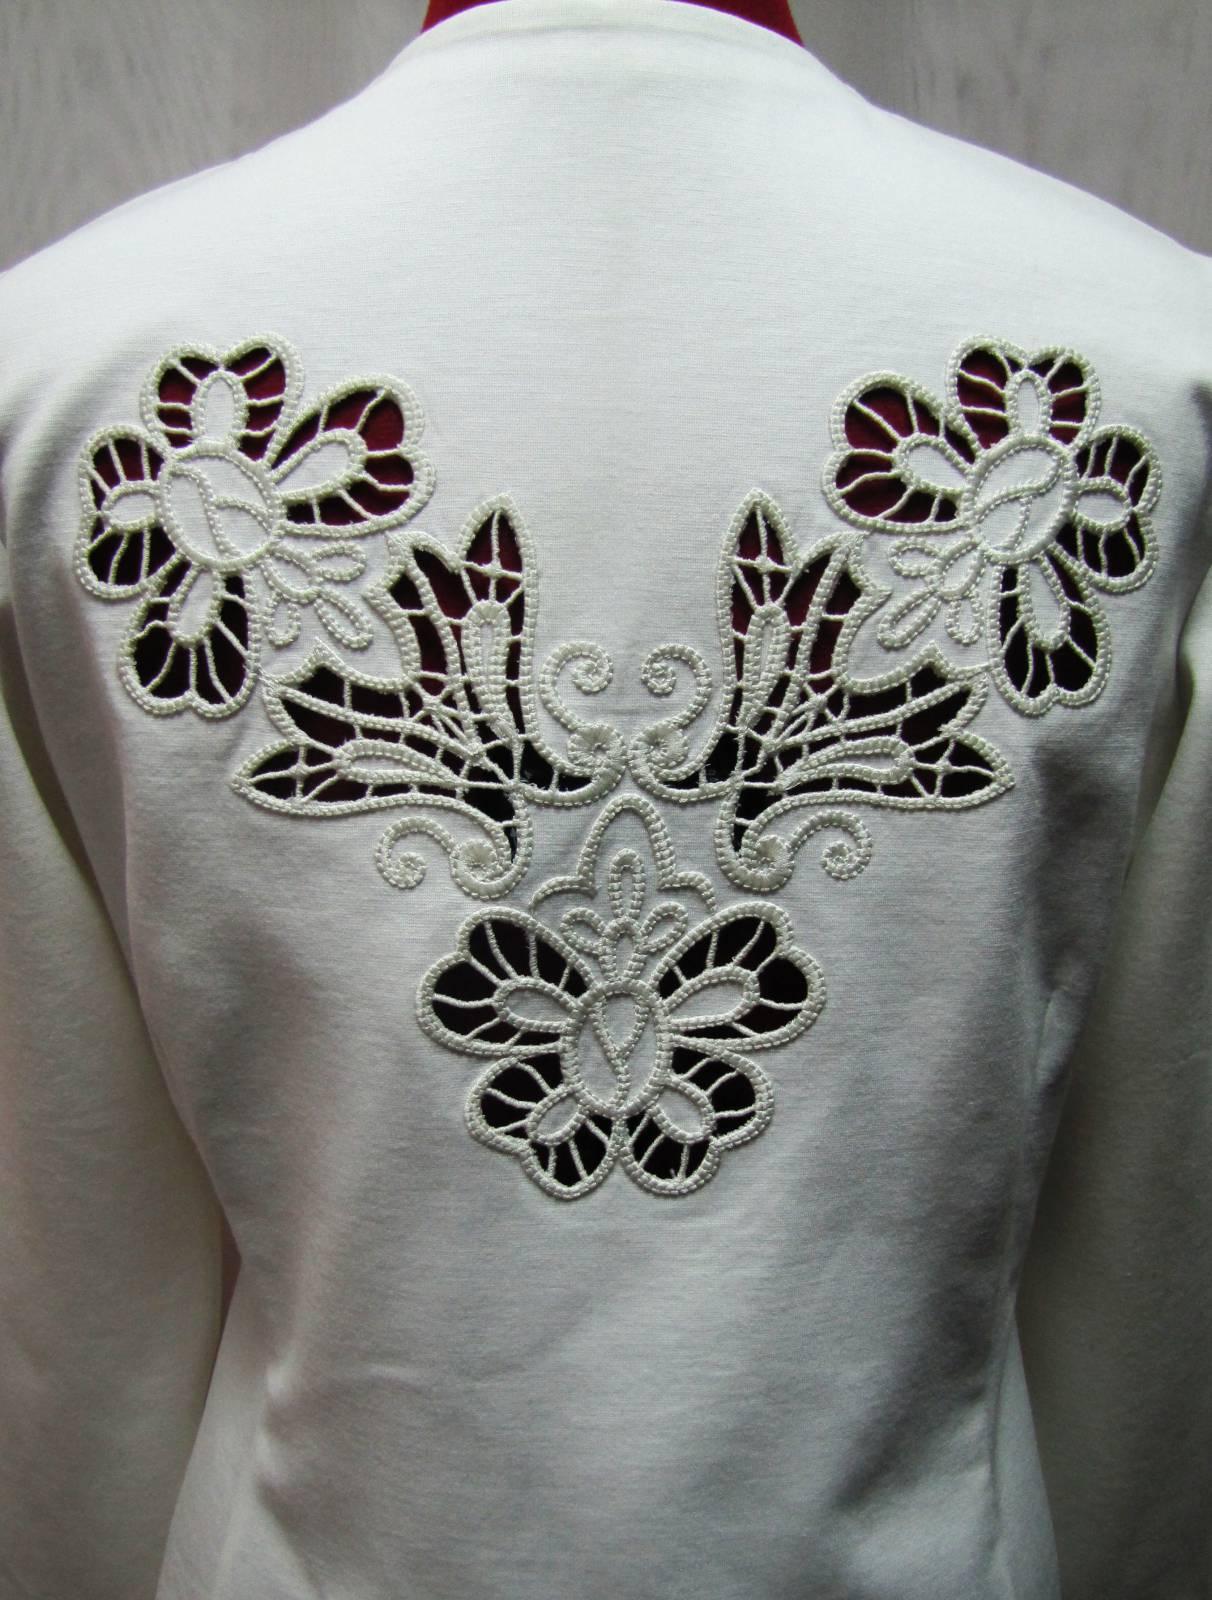 Woman's jacket with lace free embroidery design